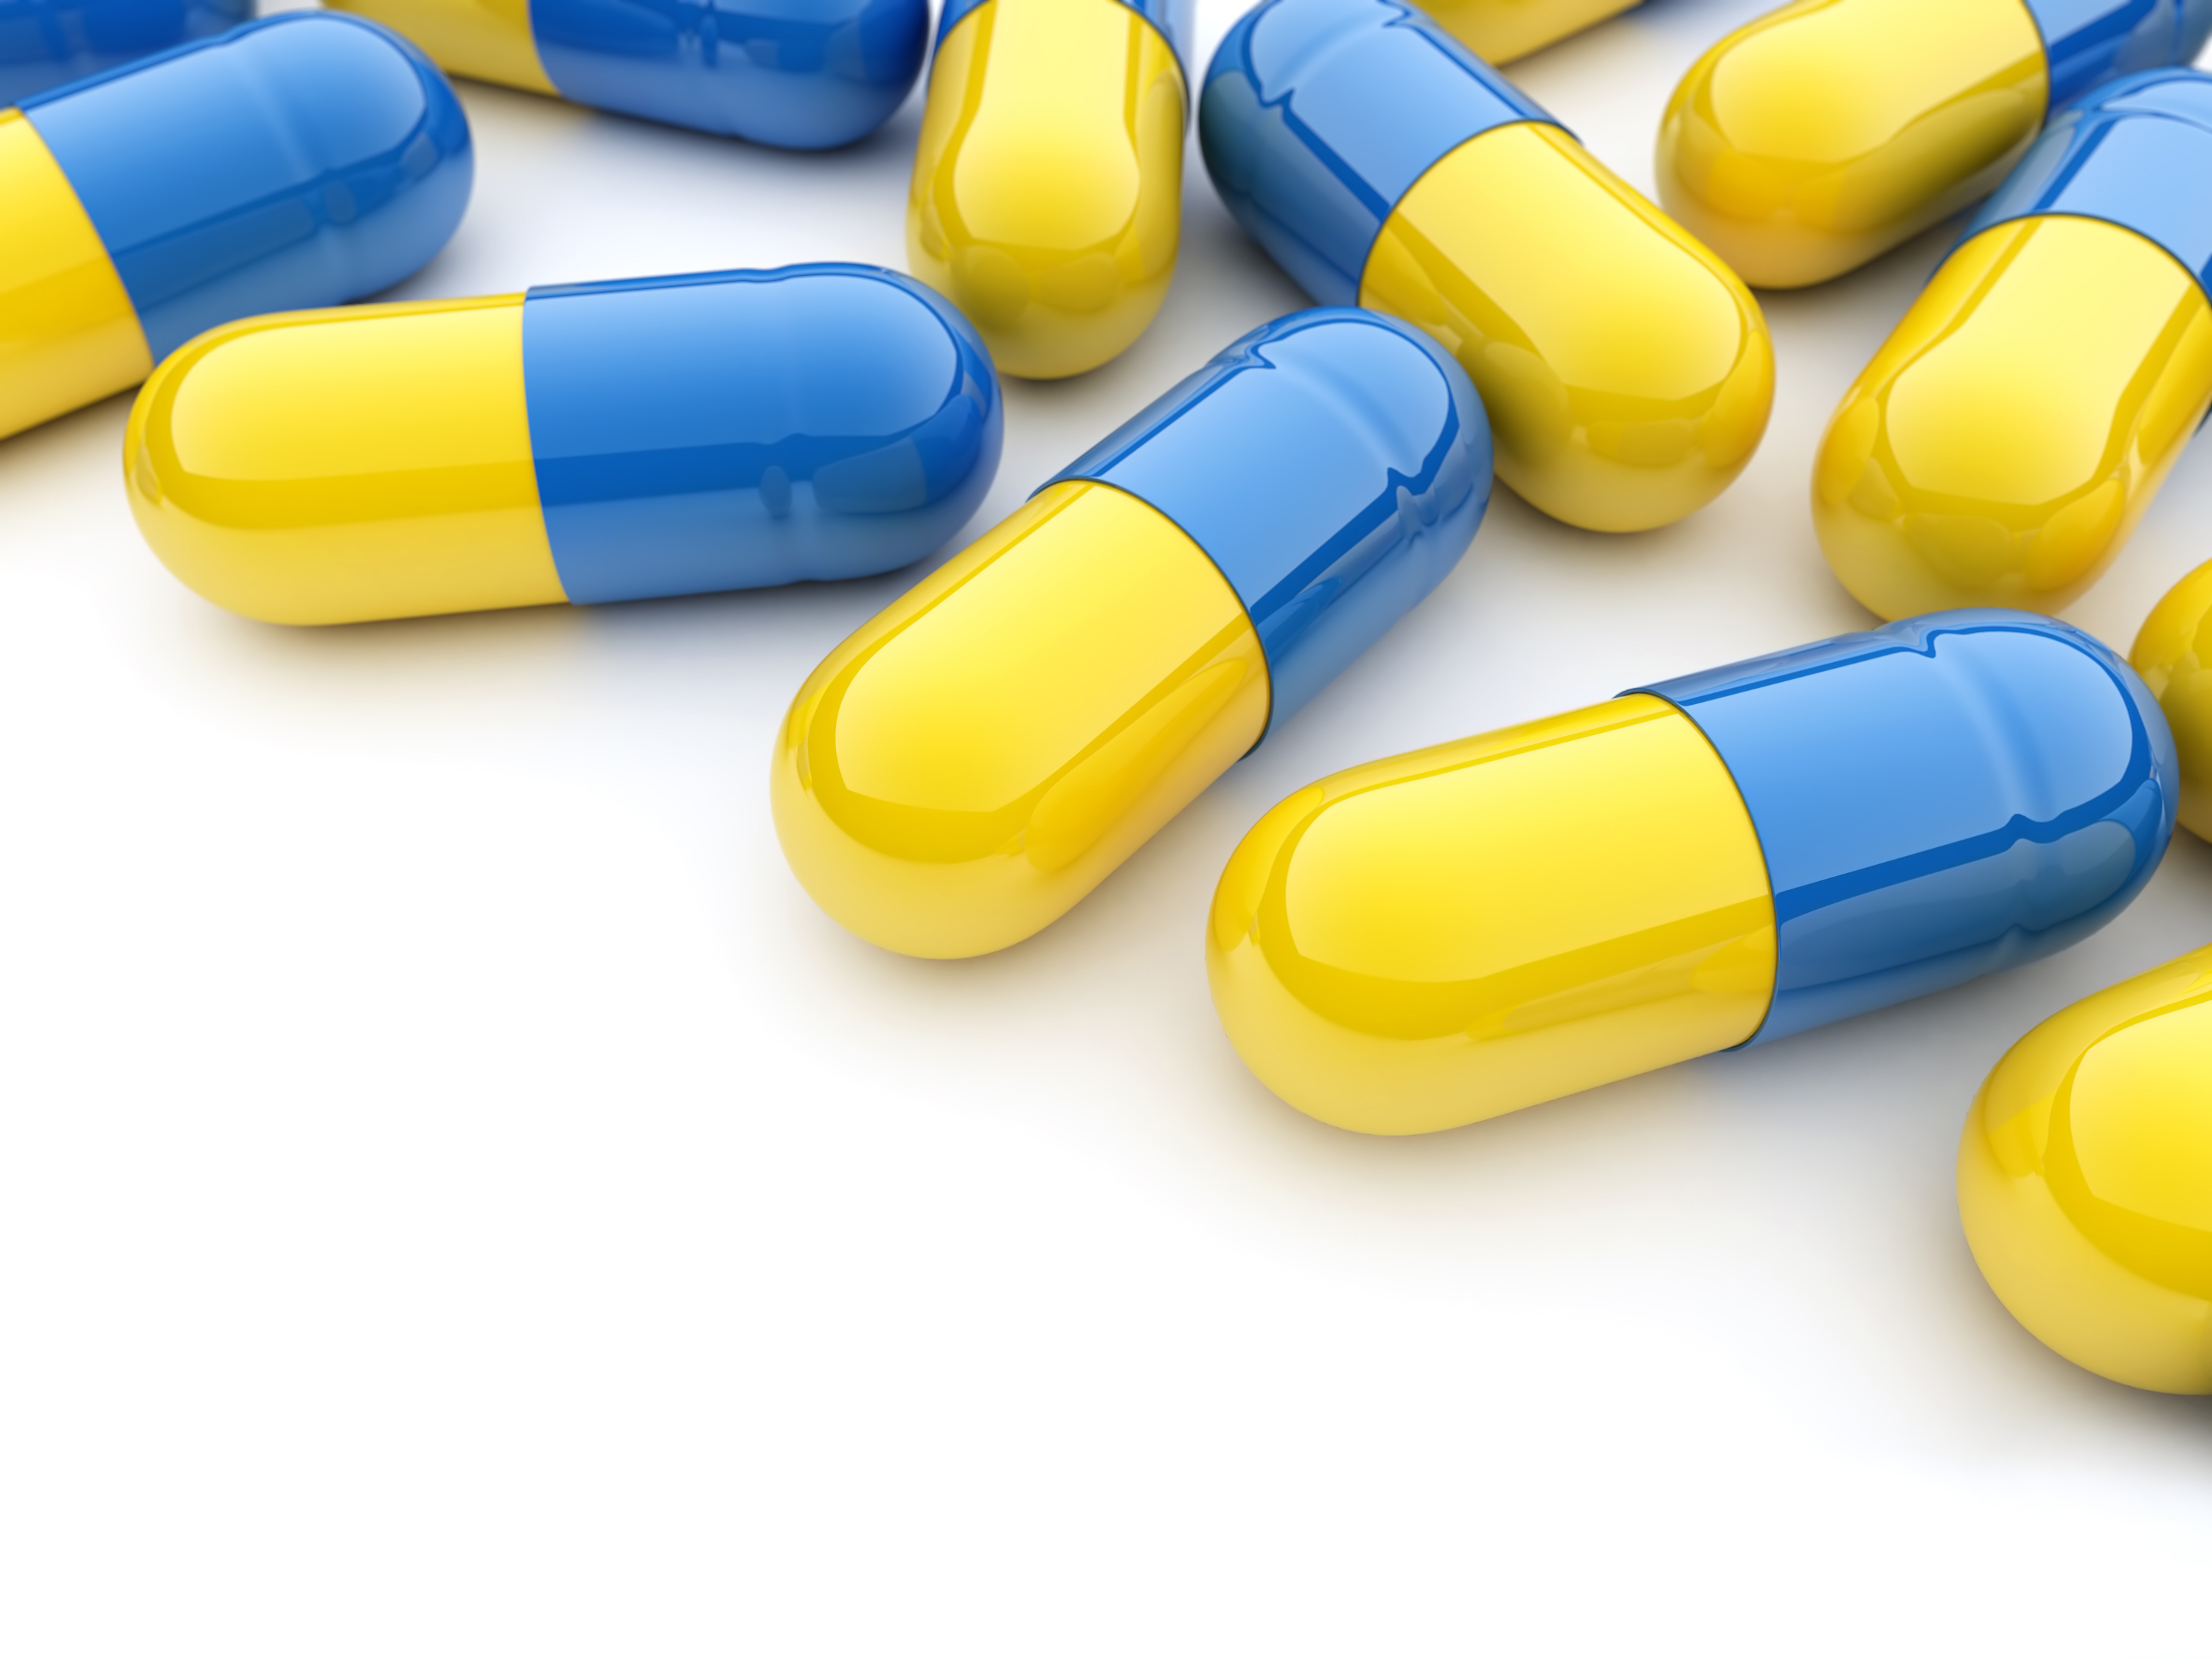 NSAIDs Survey Offers Some Surprising Answers from Pain Patients